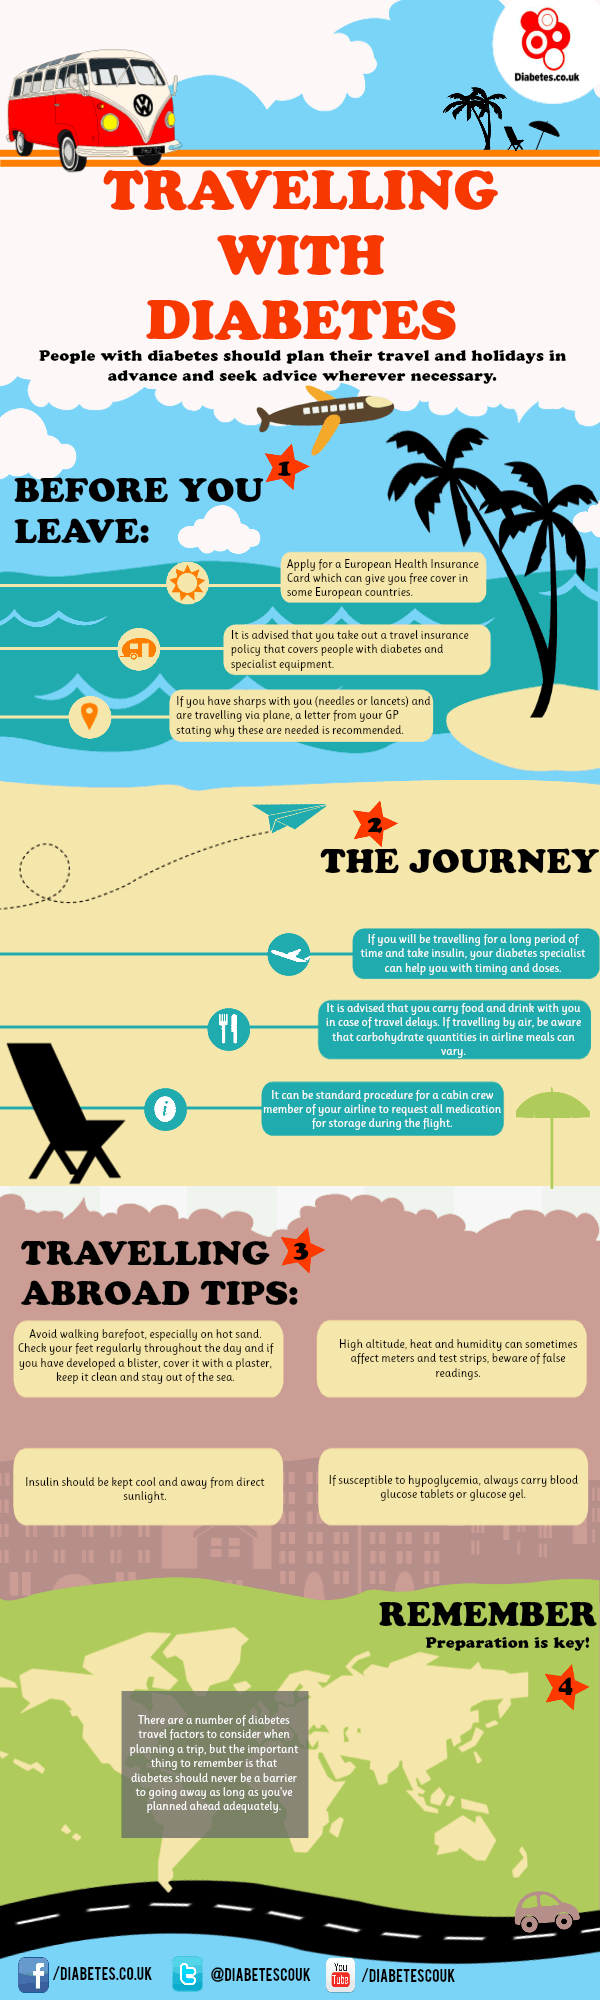 Travelling with diabetes infographic